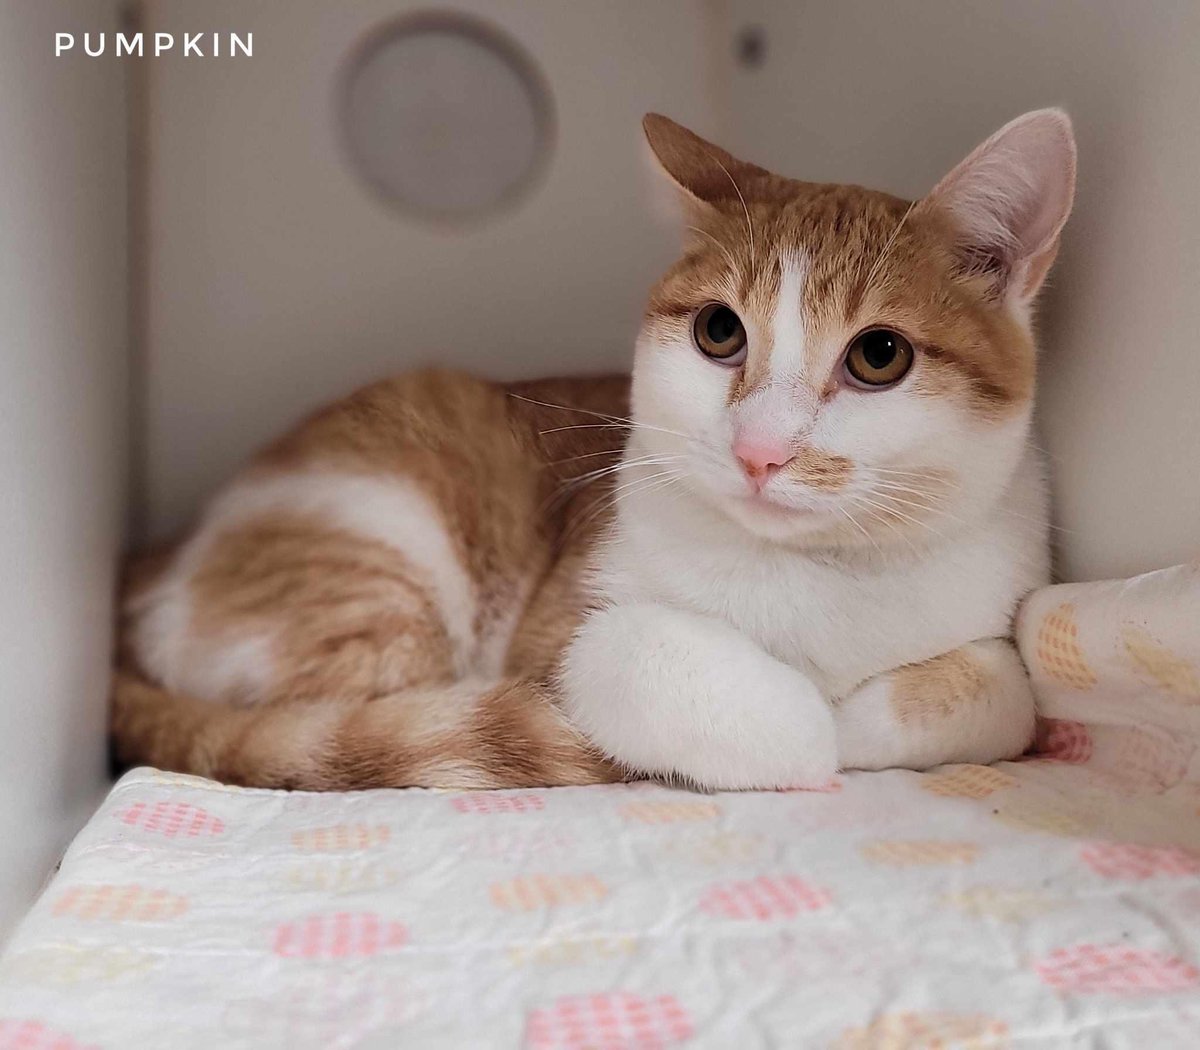 Pumpkin might be the cutest cat you’ve ever seen. (Accepting challenges in the replies.) #AdoptPureLove #ShelterCats #OrangeFemaleCats